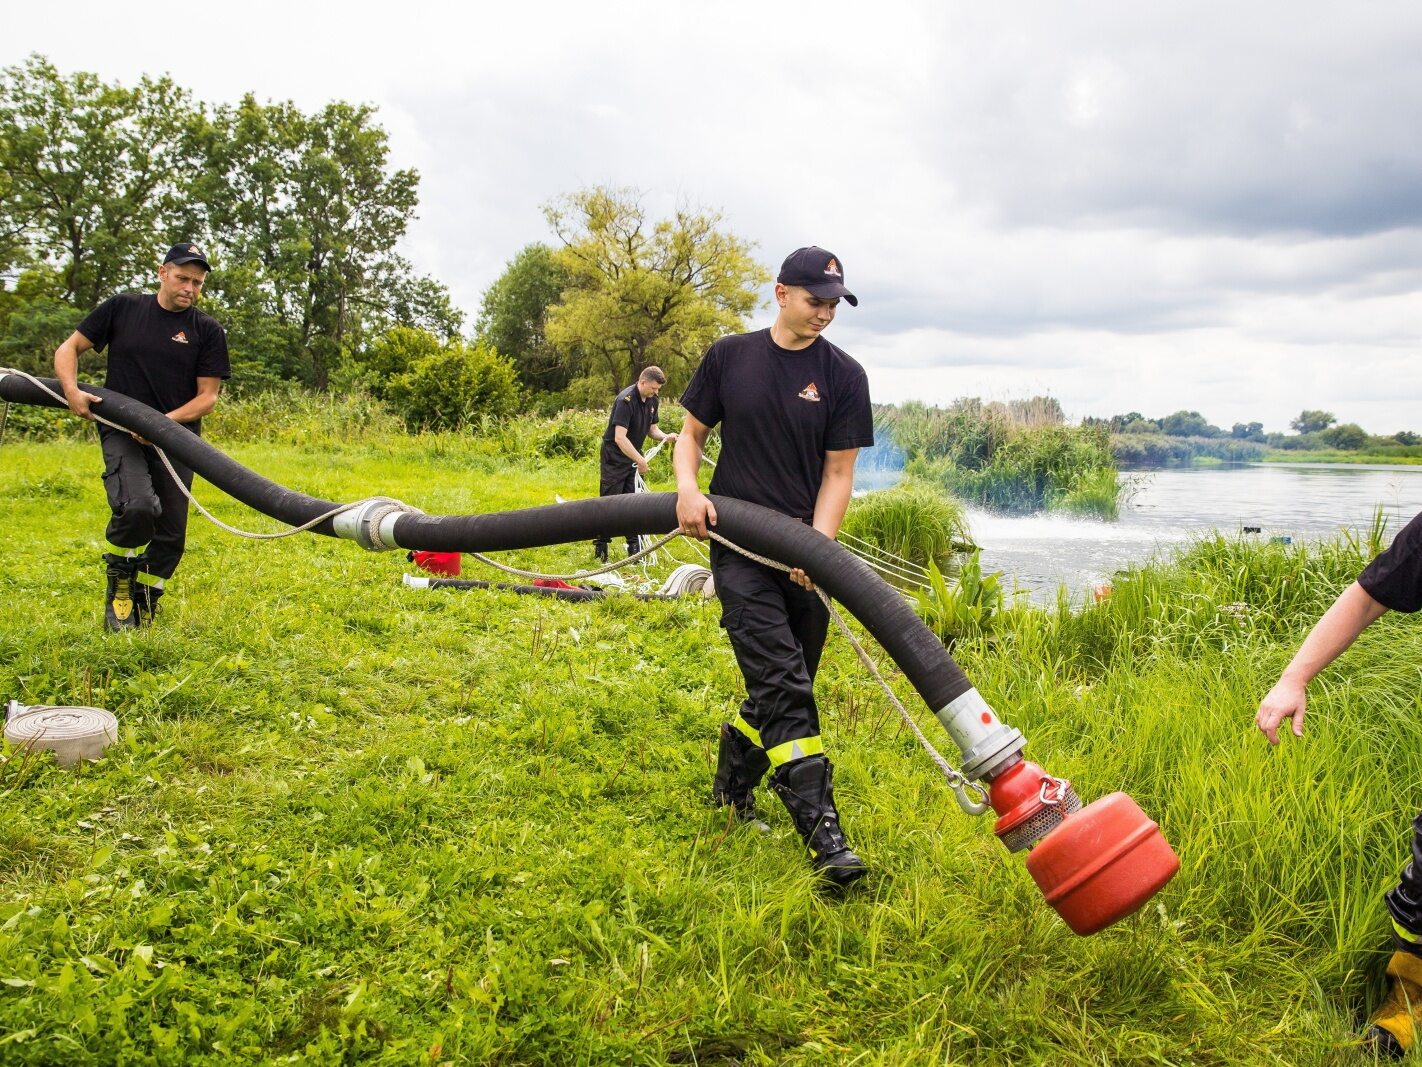 The biggest problem in the Oder?  Lack of oxygen.  Another 20 tons of fish will be disposed of